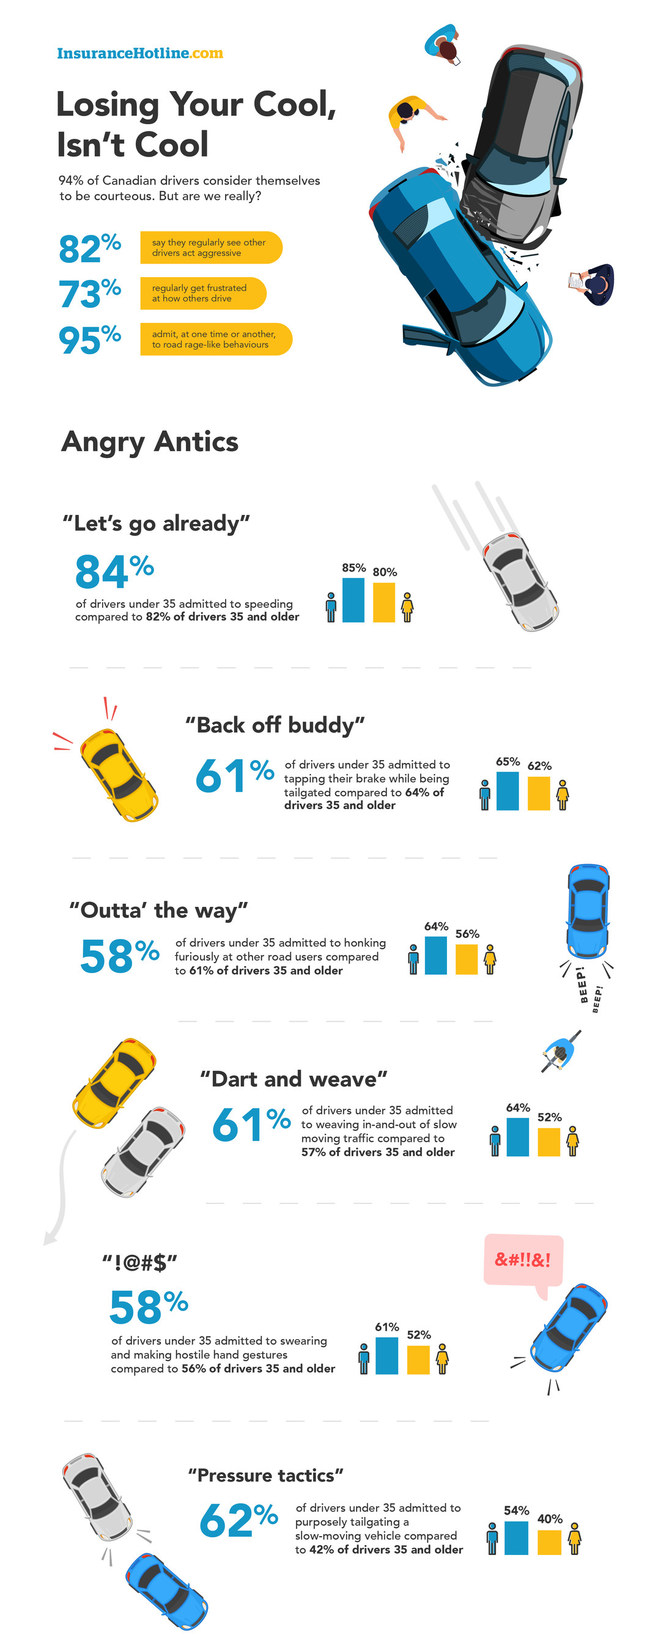 95% of Canadian Drivers Admit to Road Rage-Like Behaviour in InsuranceHotline.com’s National Survey (CNW Group/InsuranceHotline.com)